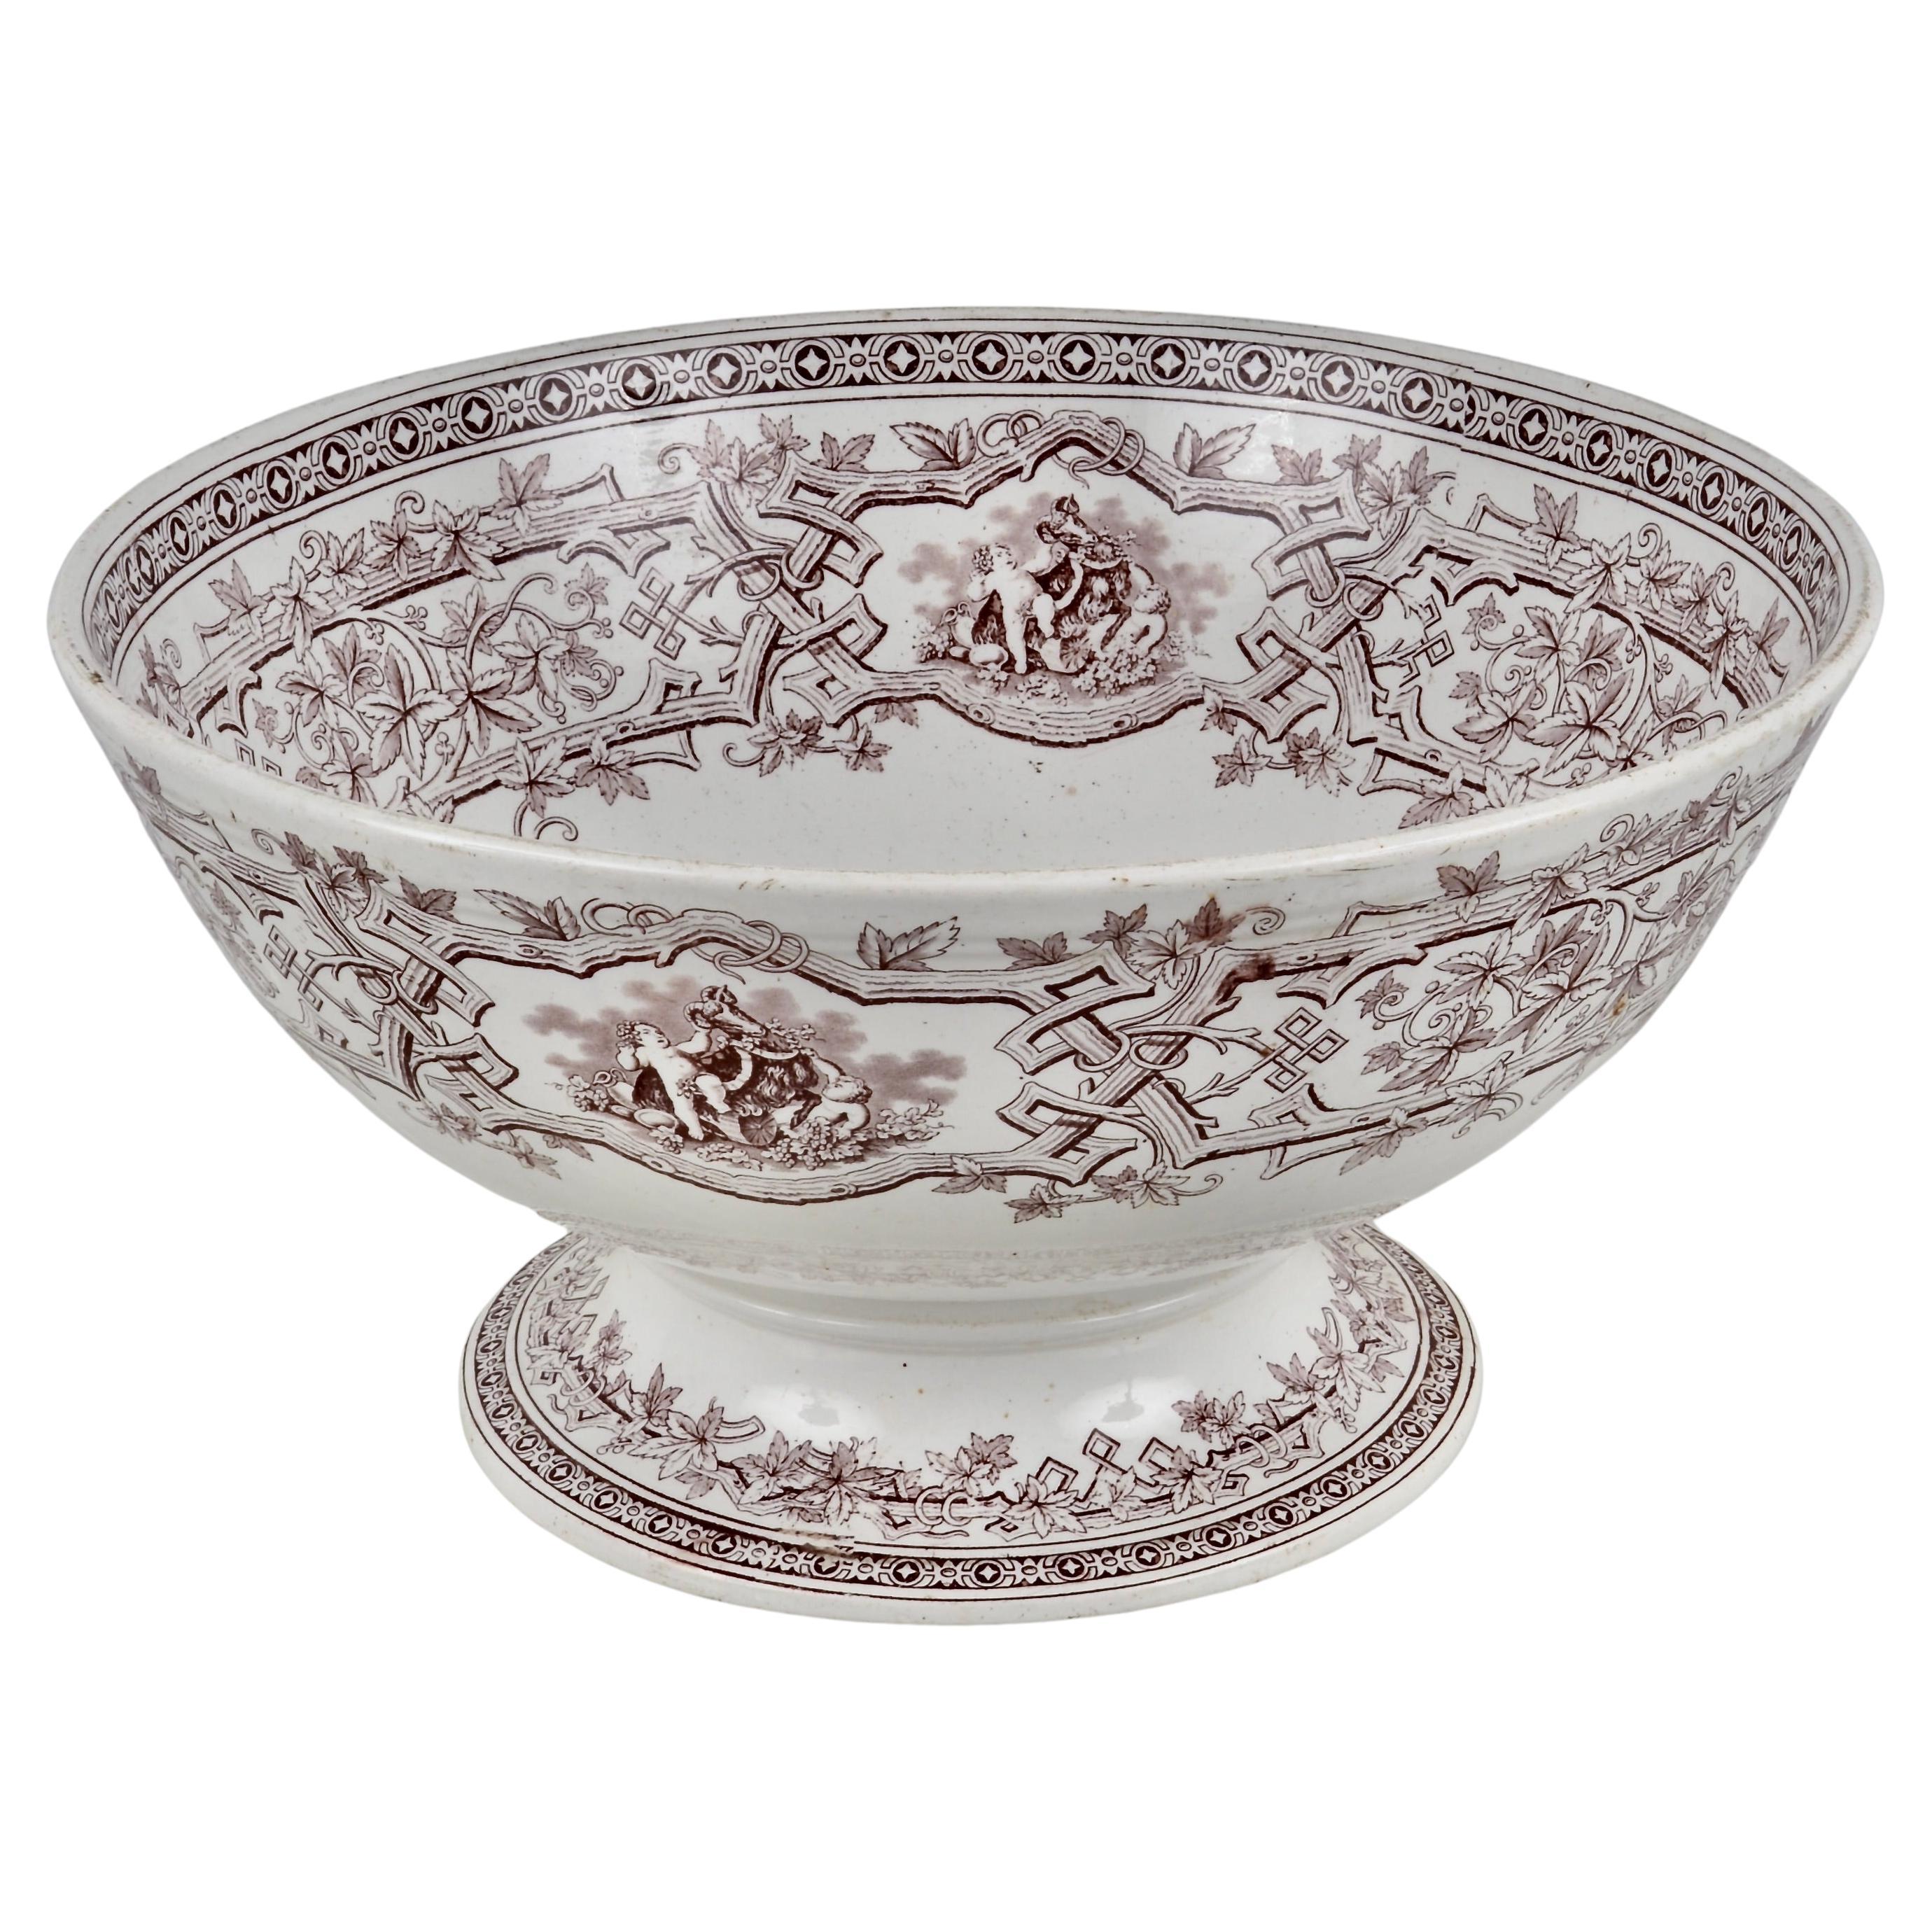 !9th C English Transferware Punch Bowl by Furnival For Sale